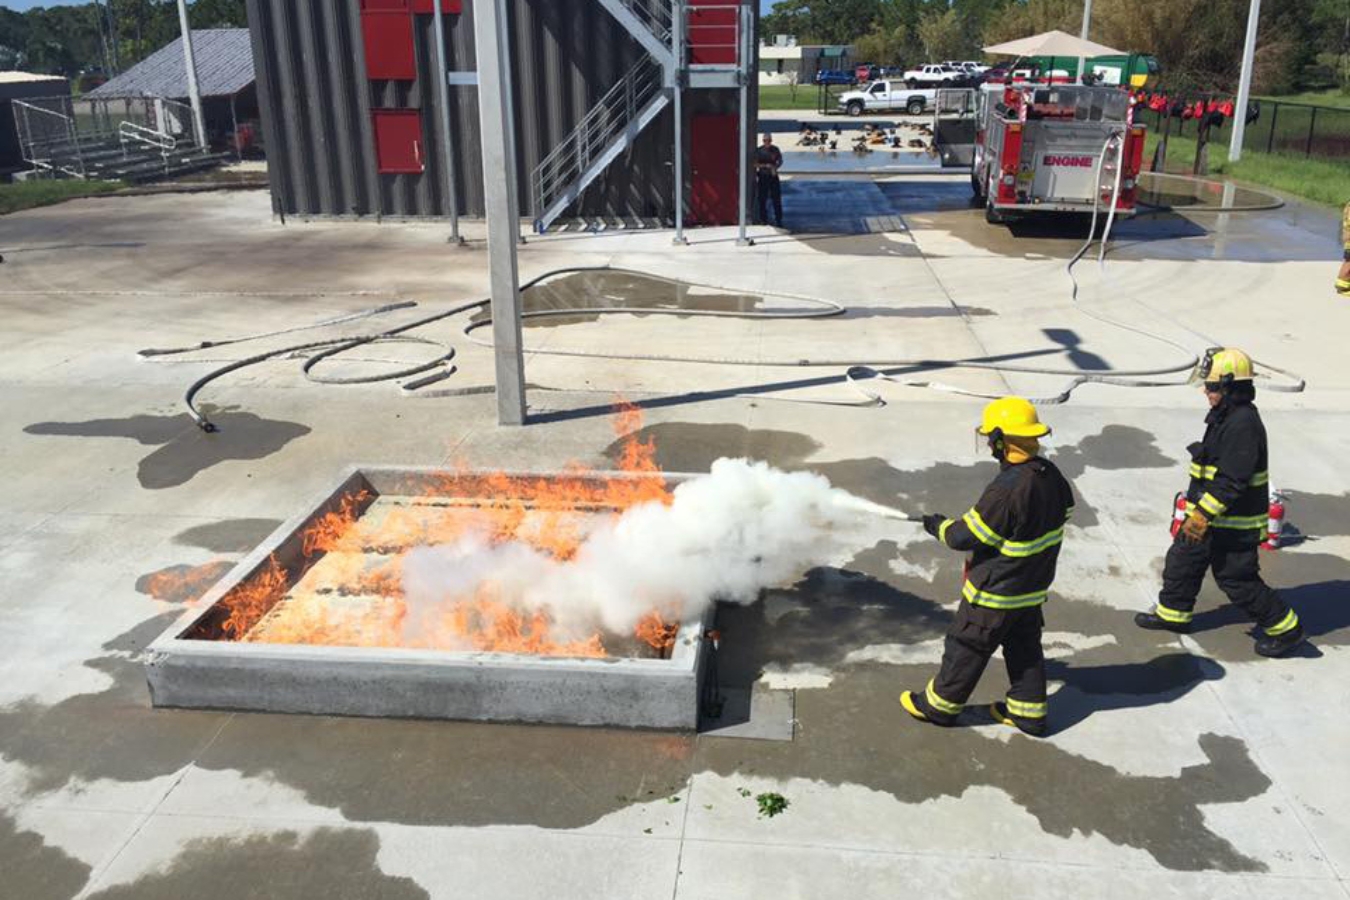 Firefighter students work together to put out a controlled fire